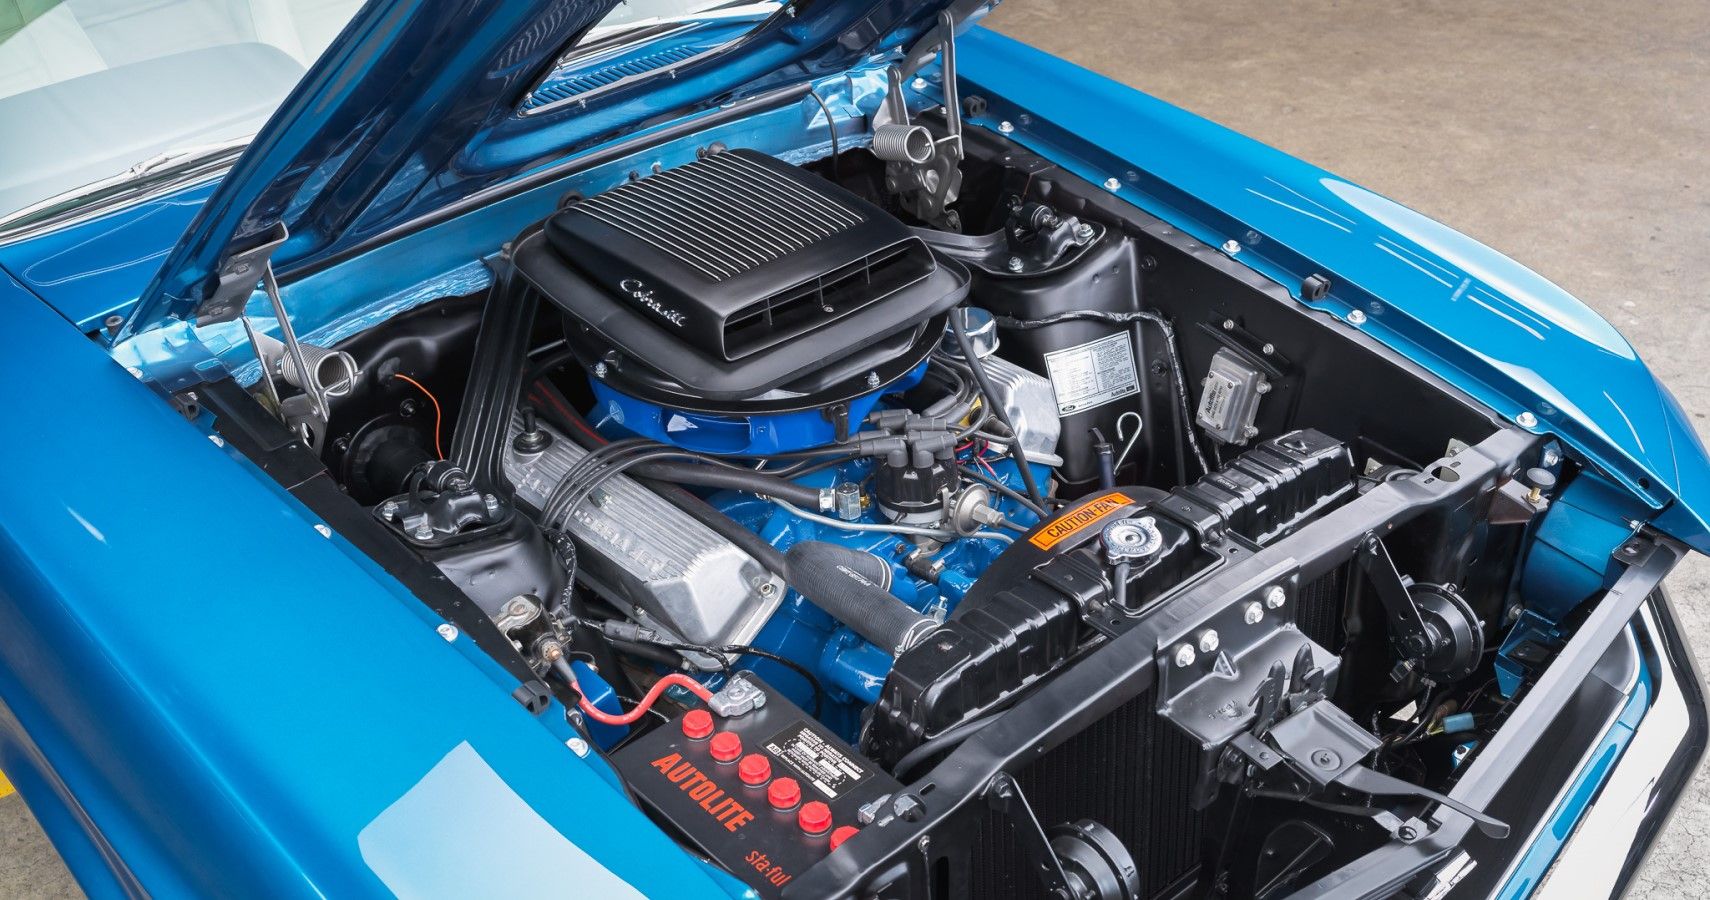 1970 Ford Mustang 428 Cobra Jet engine bay view